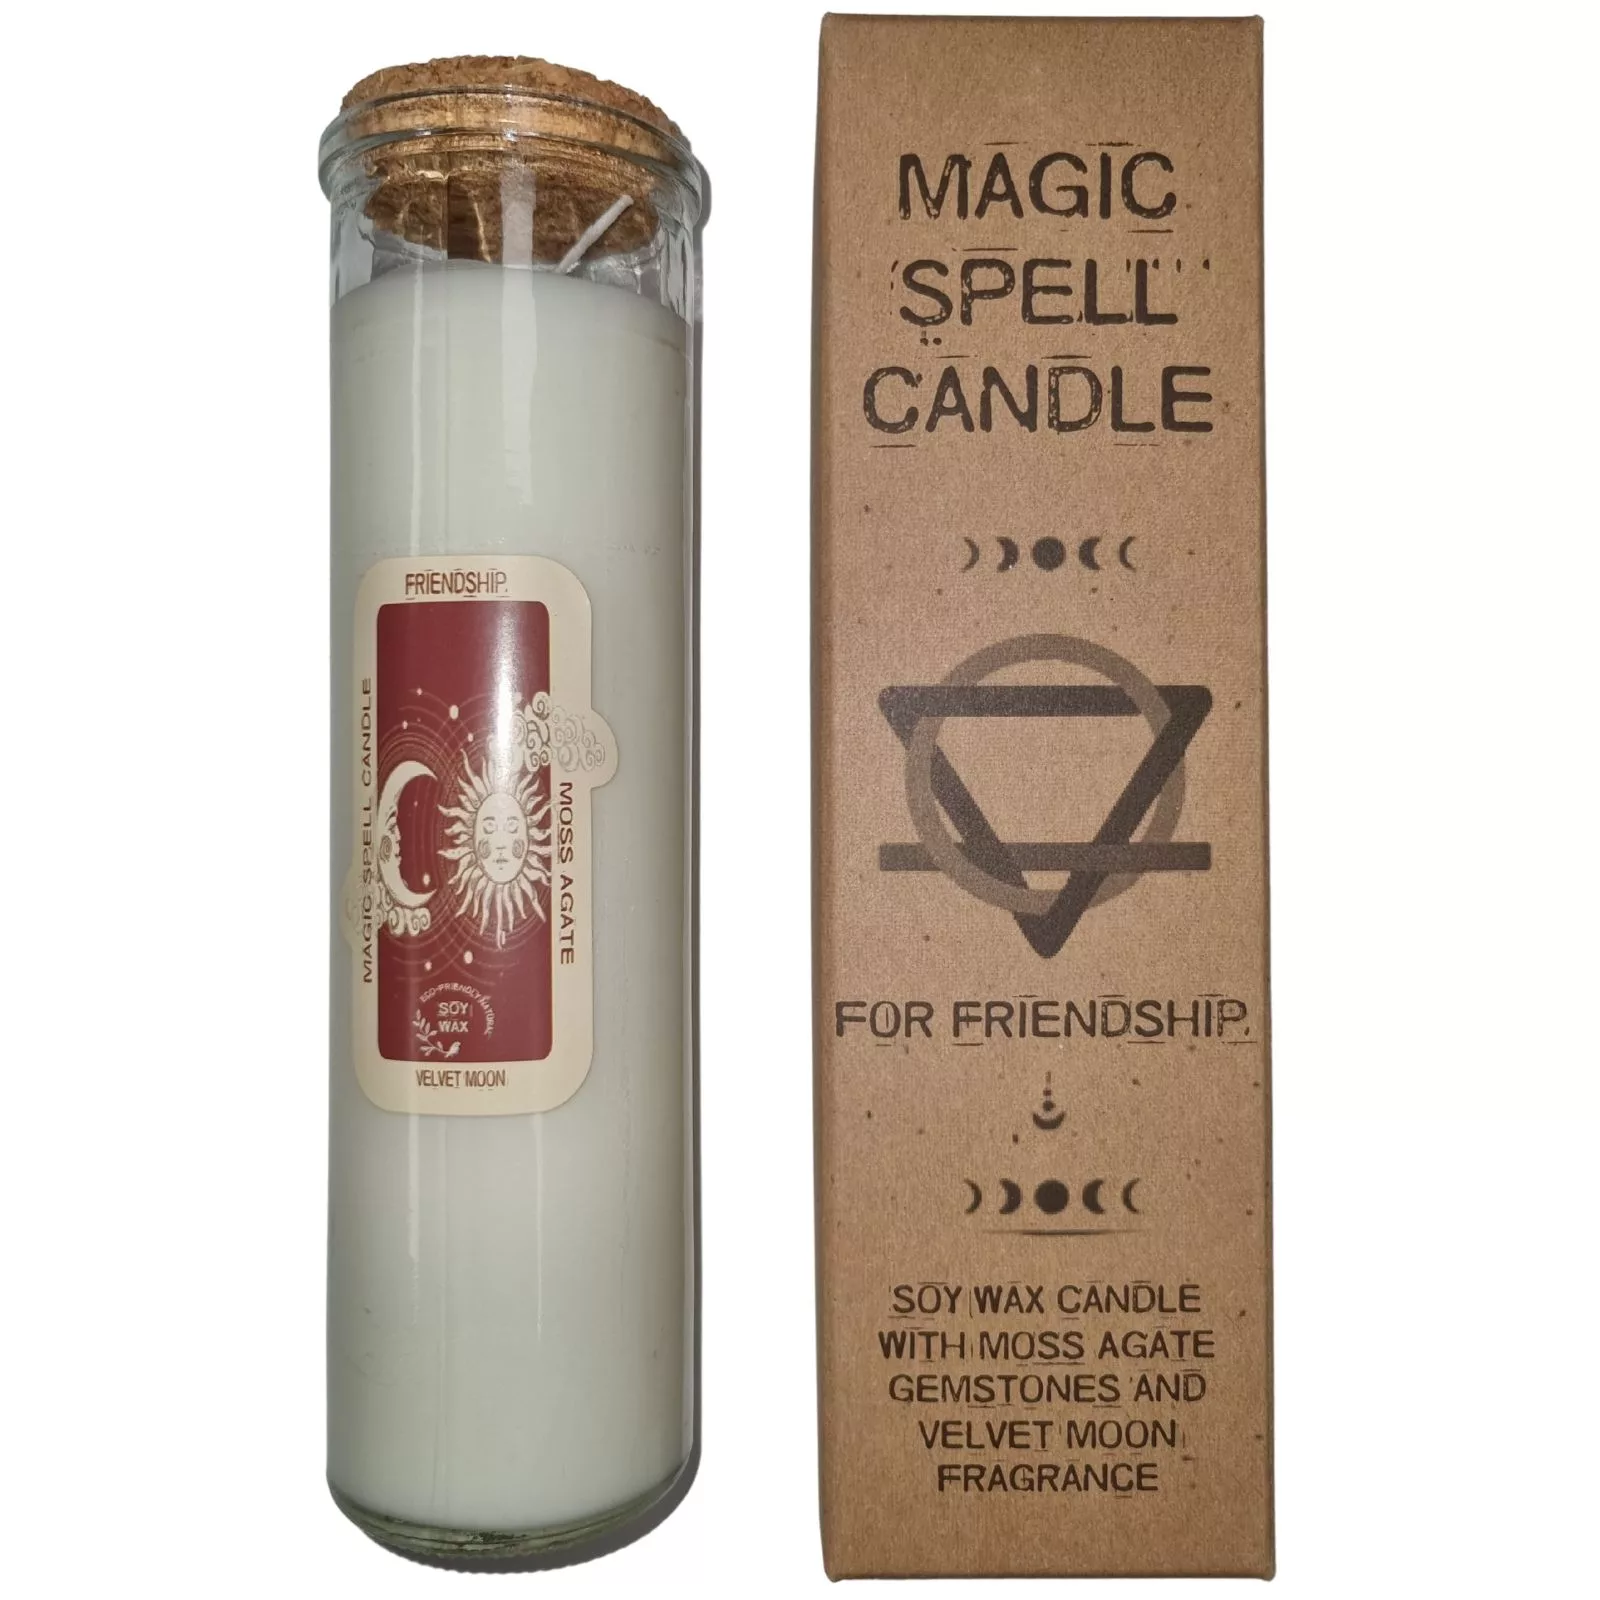 Magic Spell Candle – Friendship